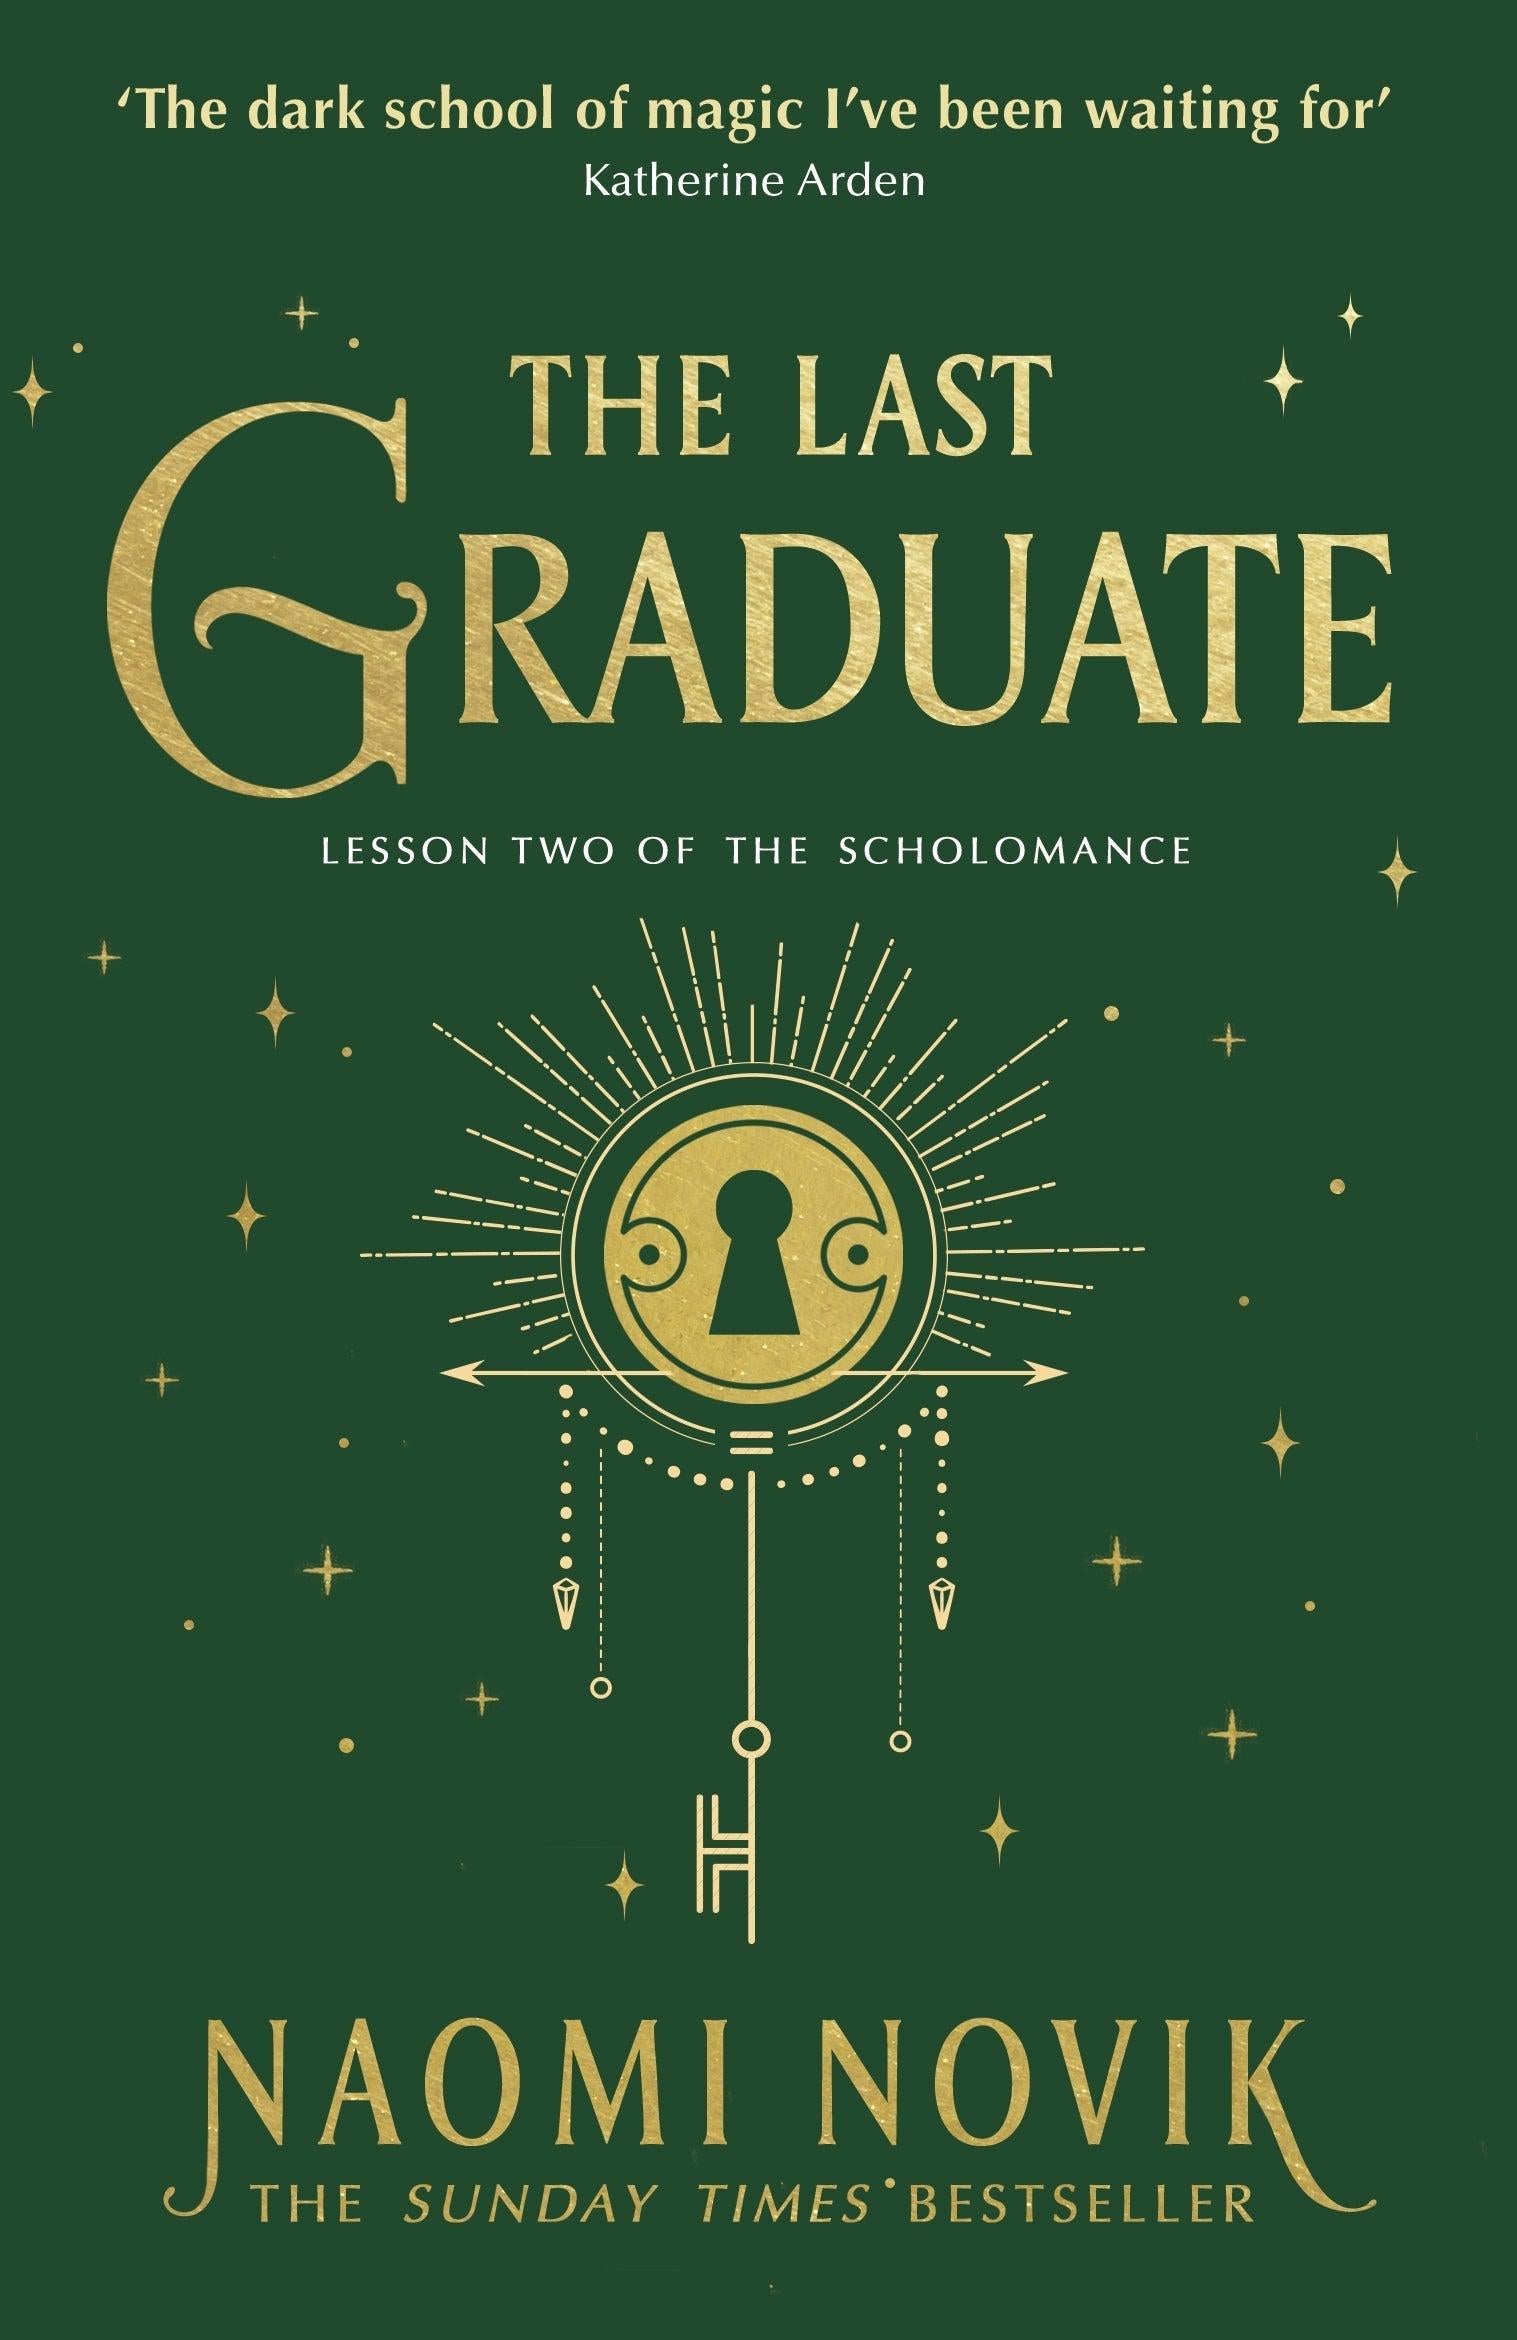 The Last Graduate by Naomi Novik  Buy online from Aotearoa bookstore  Parallel